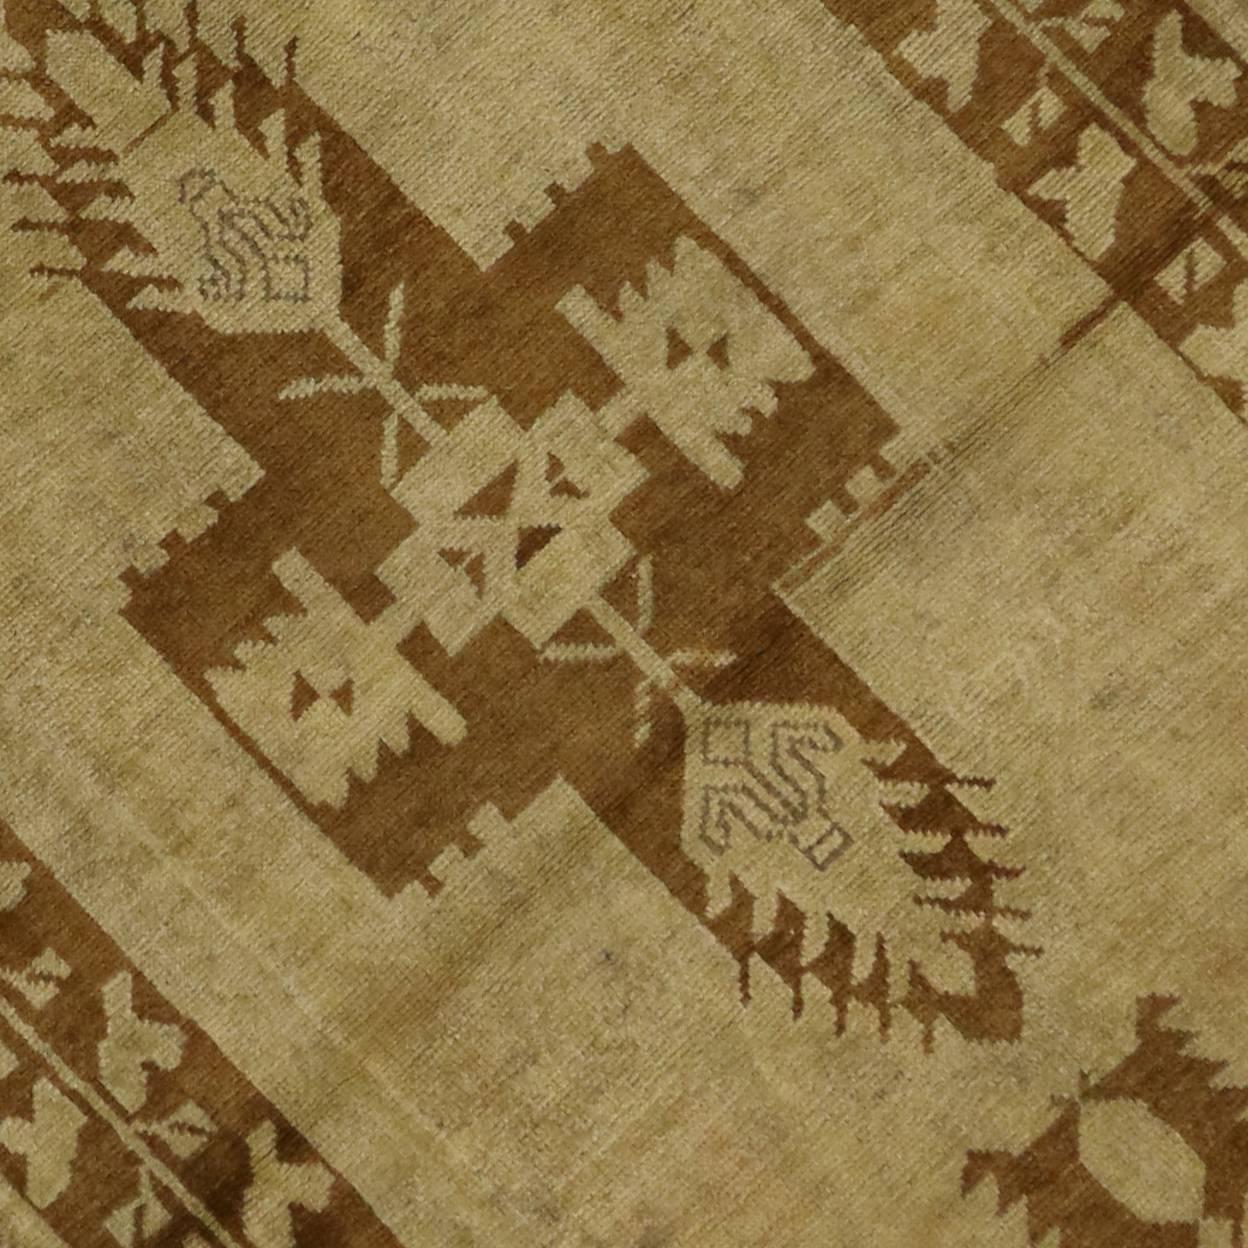 Vintage Turkish Oushak Runner with Warm, Neutral Colors, Hallway Runner For Sale 6